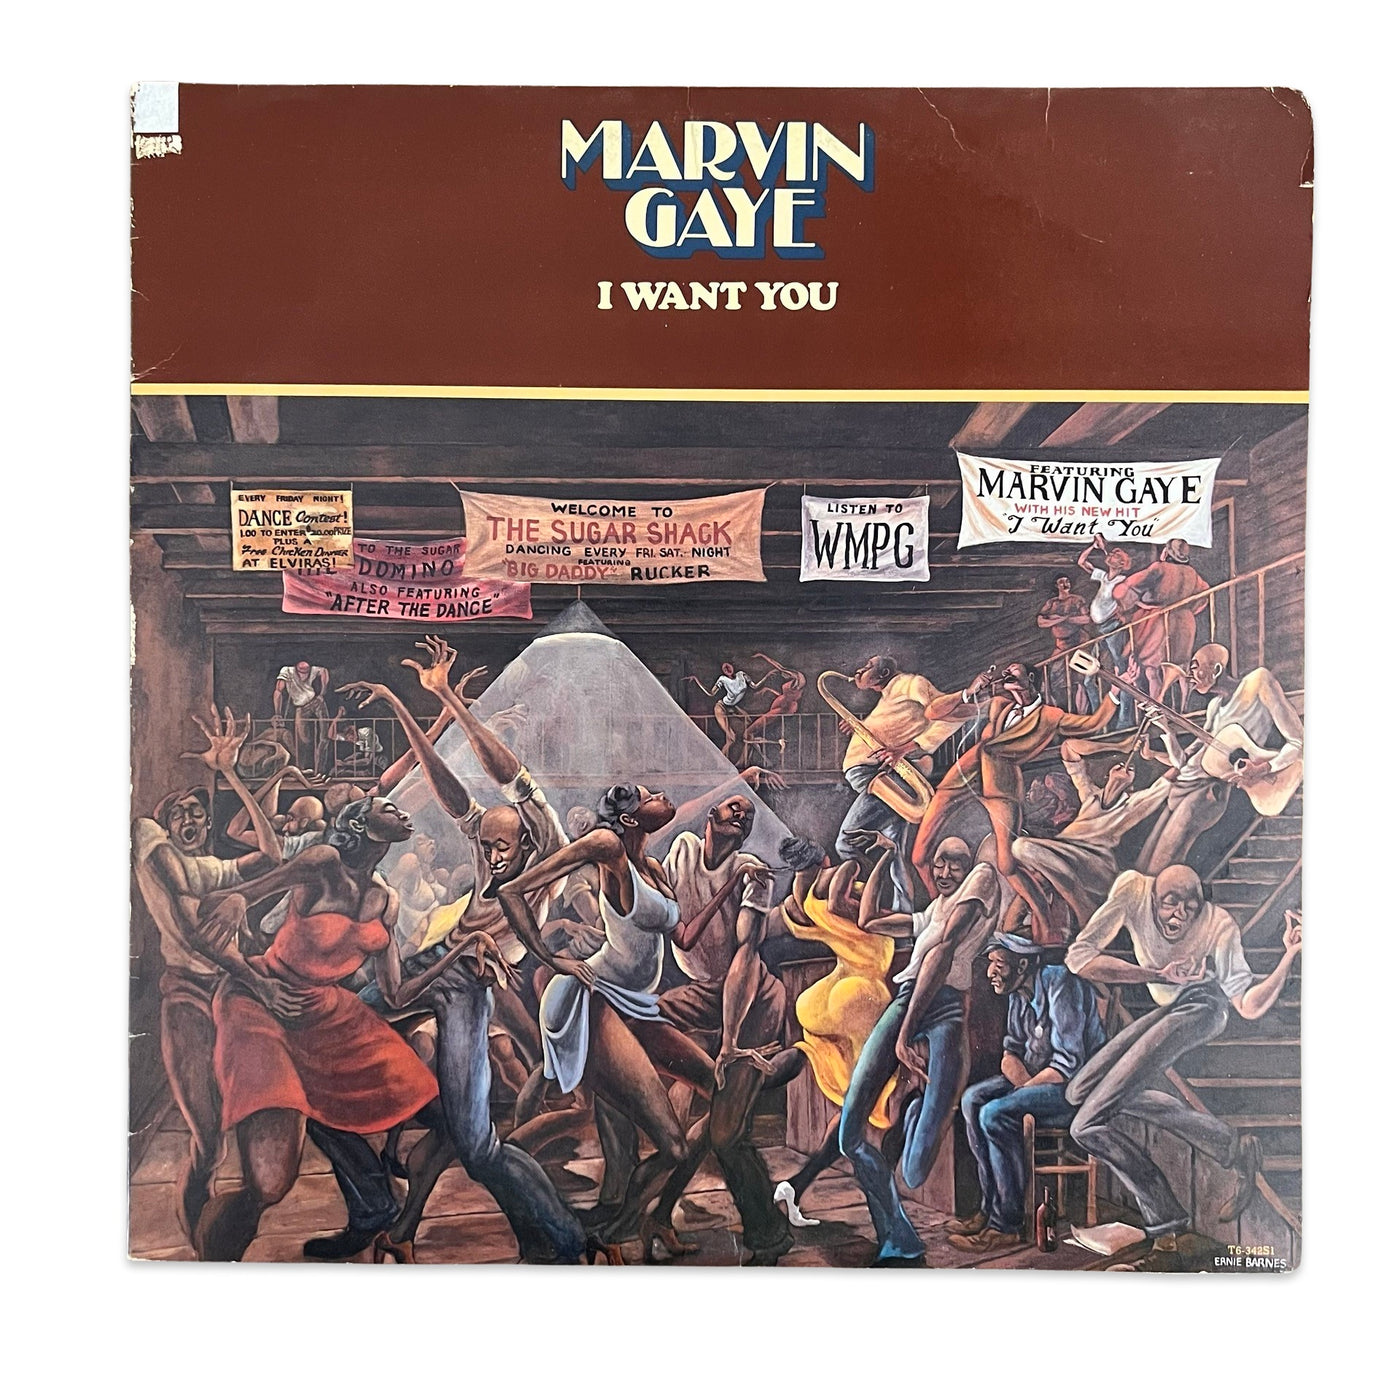 Marvin Gaye – I Want You